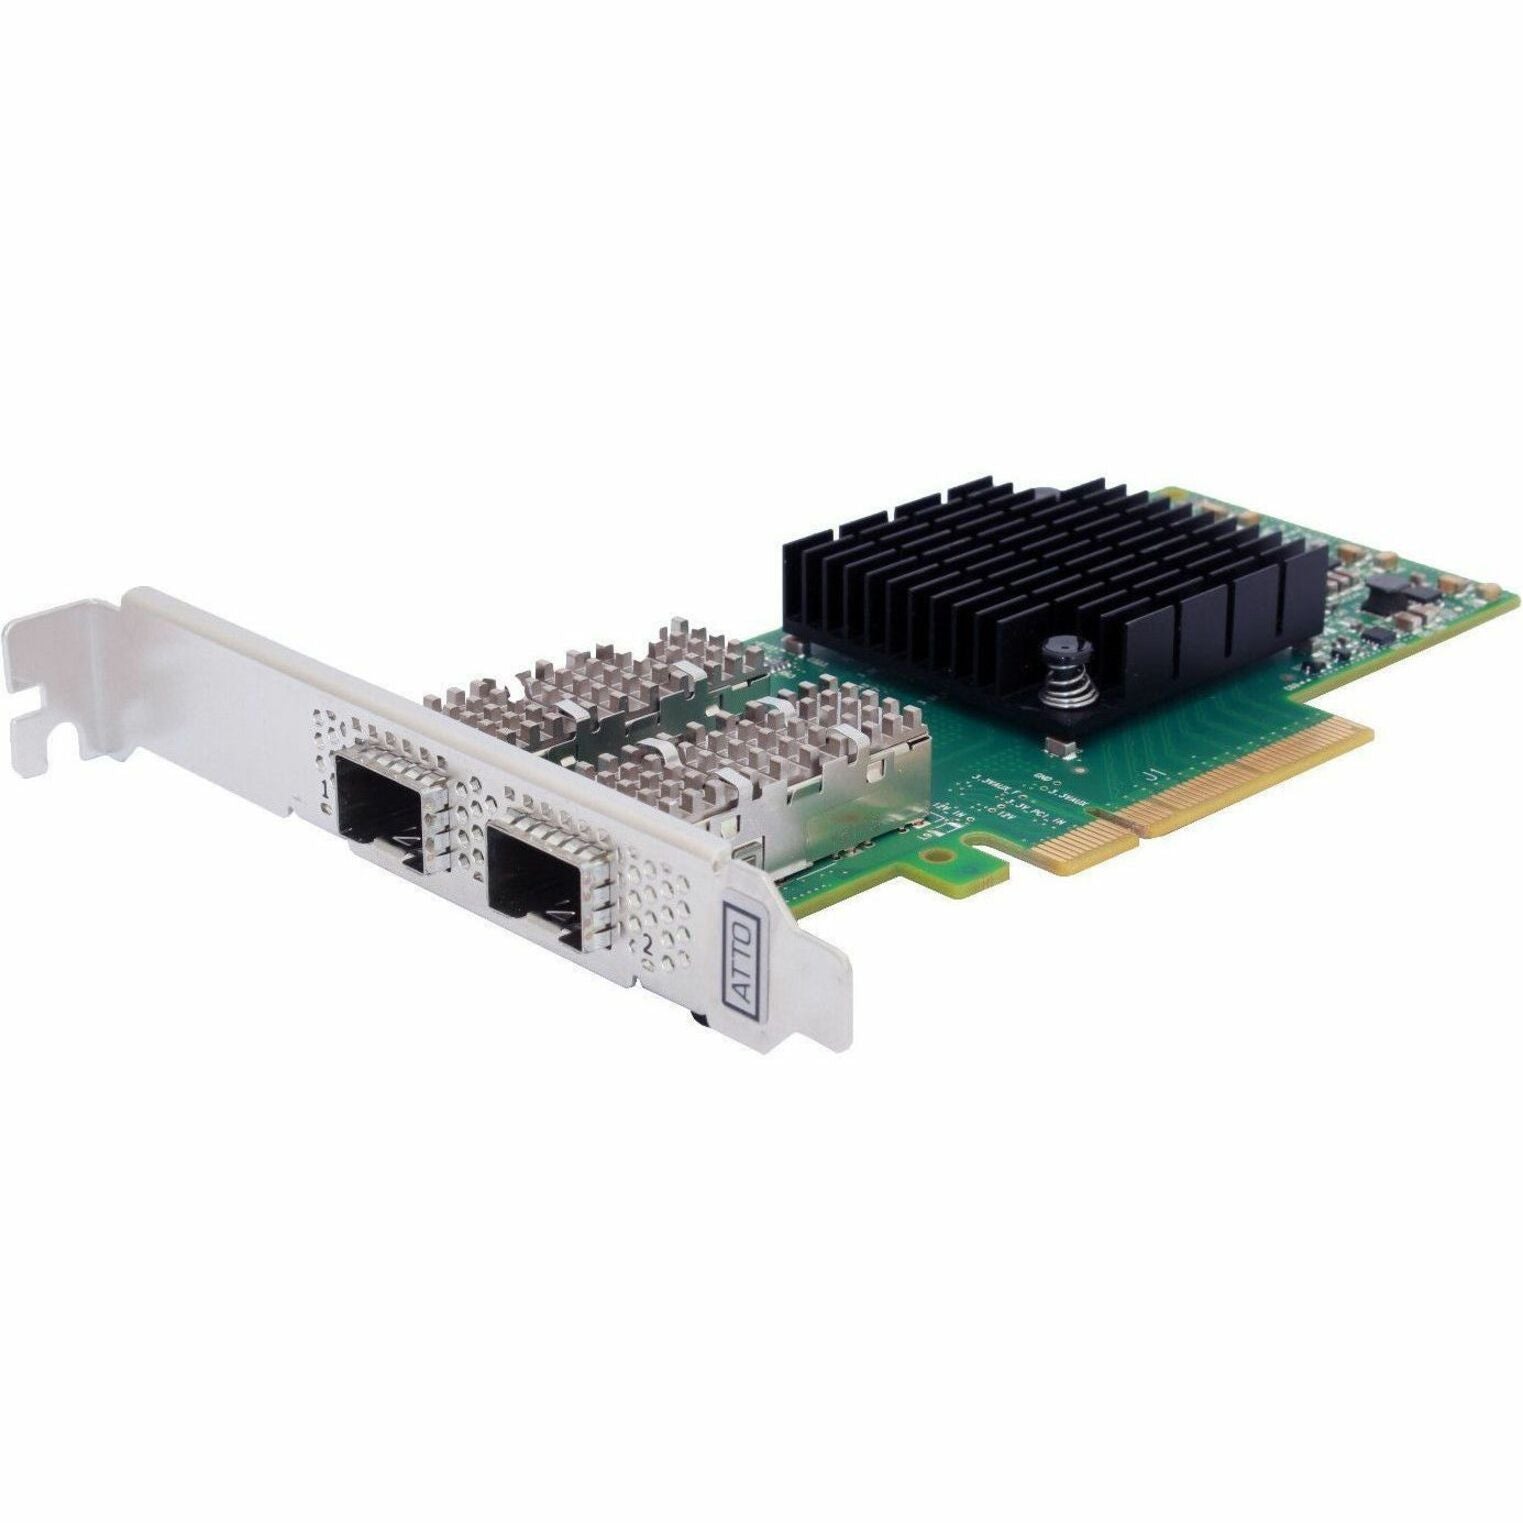 ATTO FFRM-N322-10T 10Gigabit Ethernet Card, High-Speed Data Transfer for Fast Network Connectivity